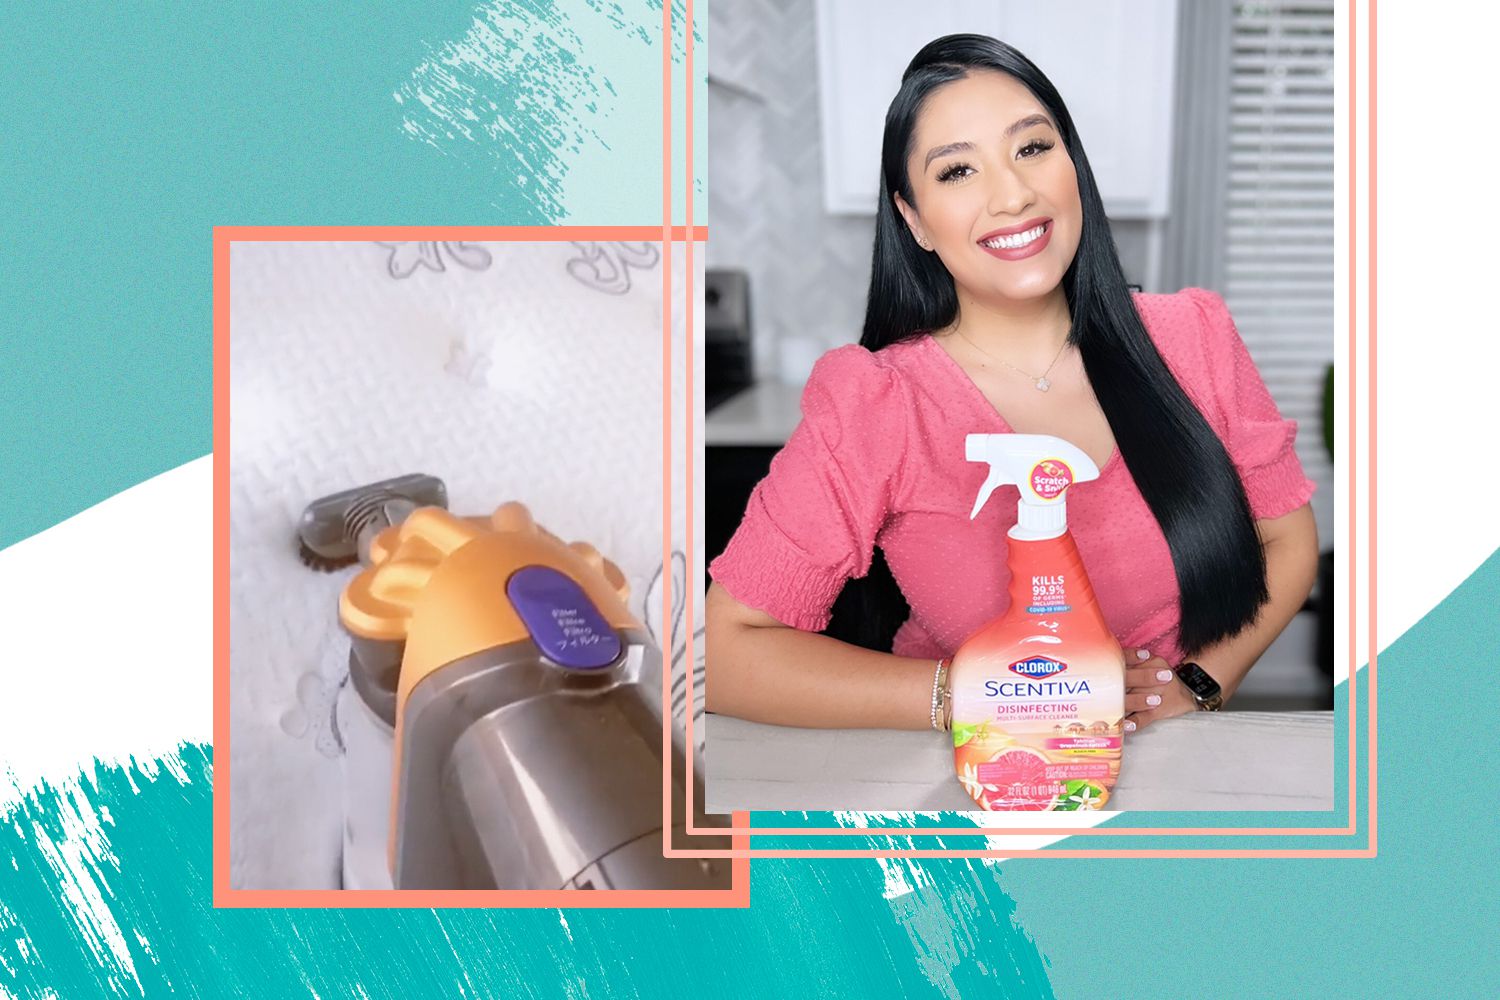 8 Must-Know Cleaning Tips From the Queen of Cleaning TikTok